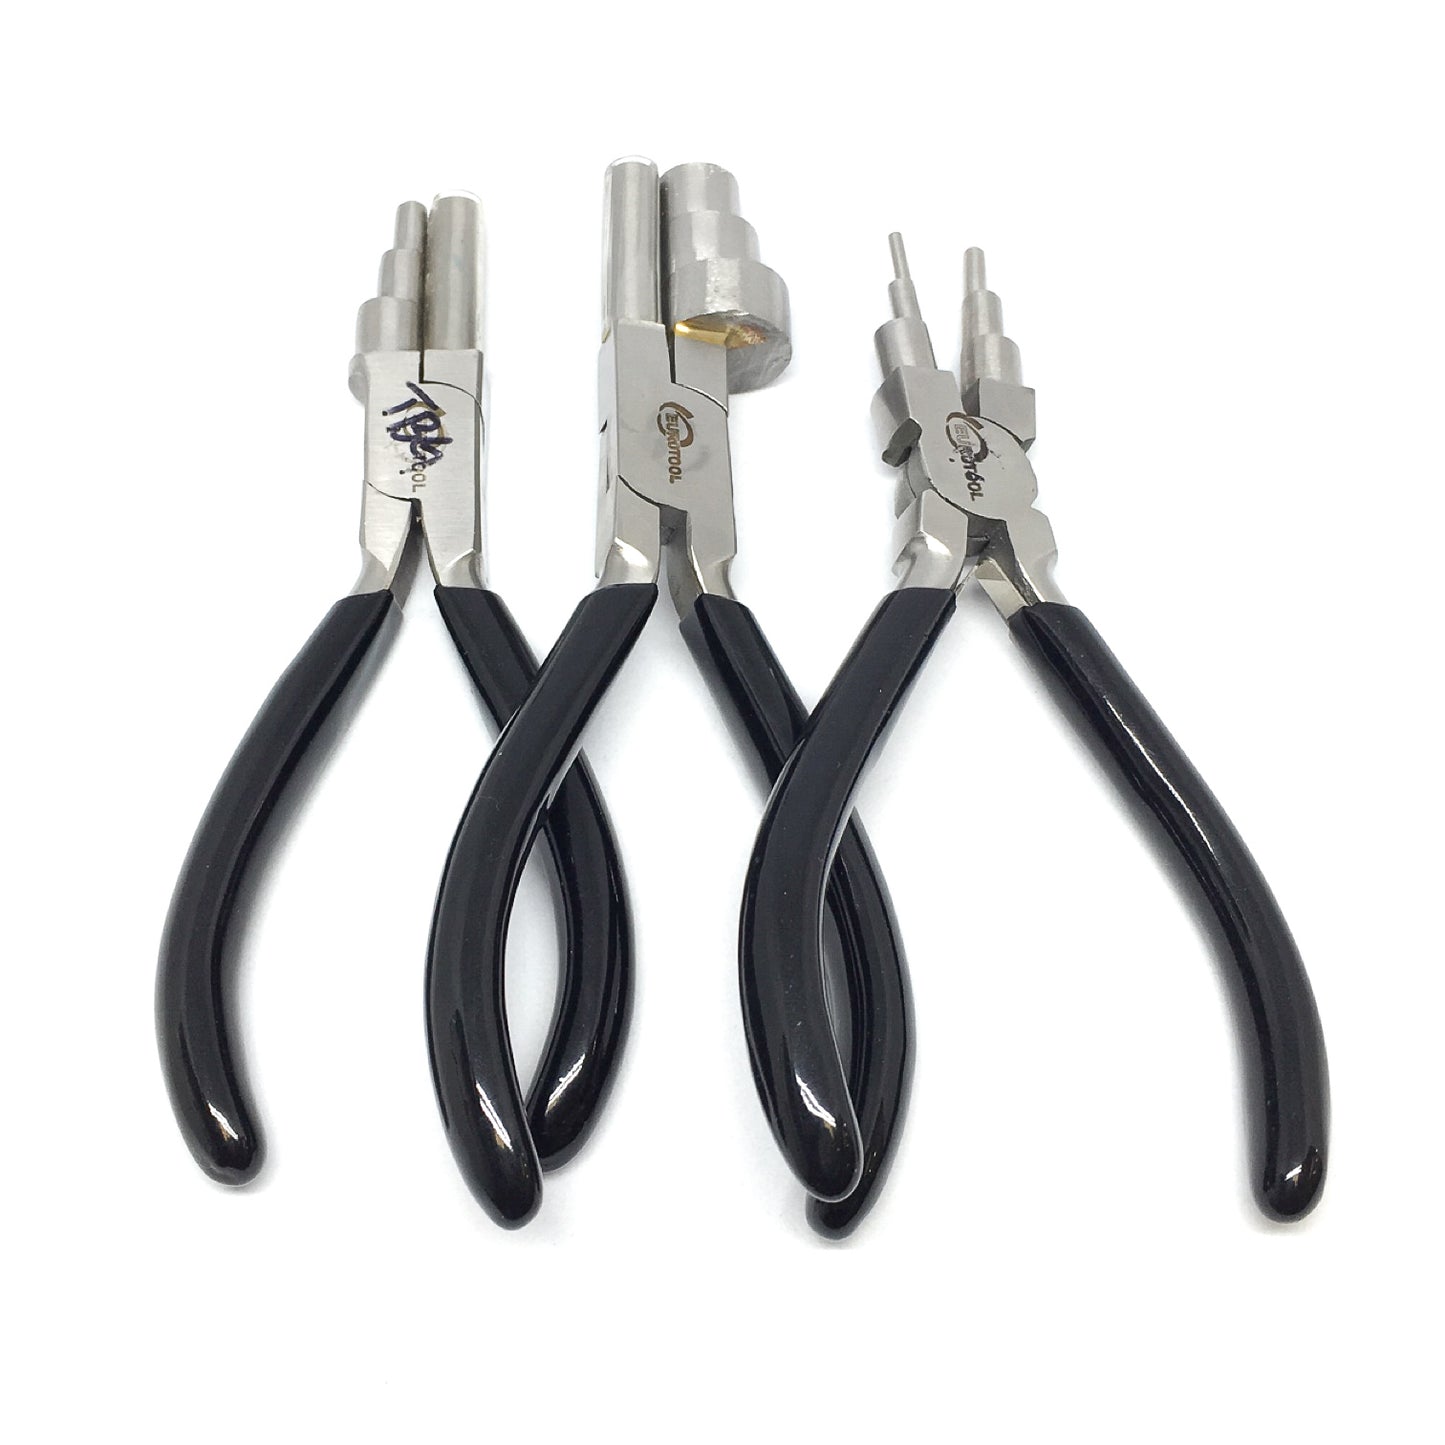 Wrap and Tap Pliers - Small 3-Step